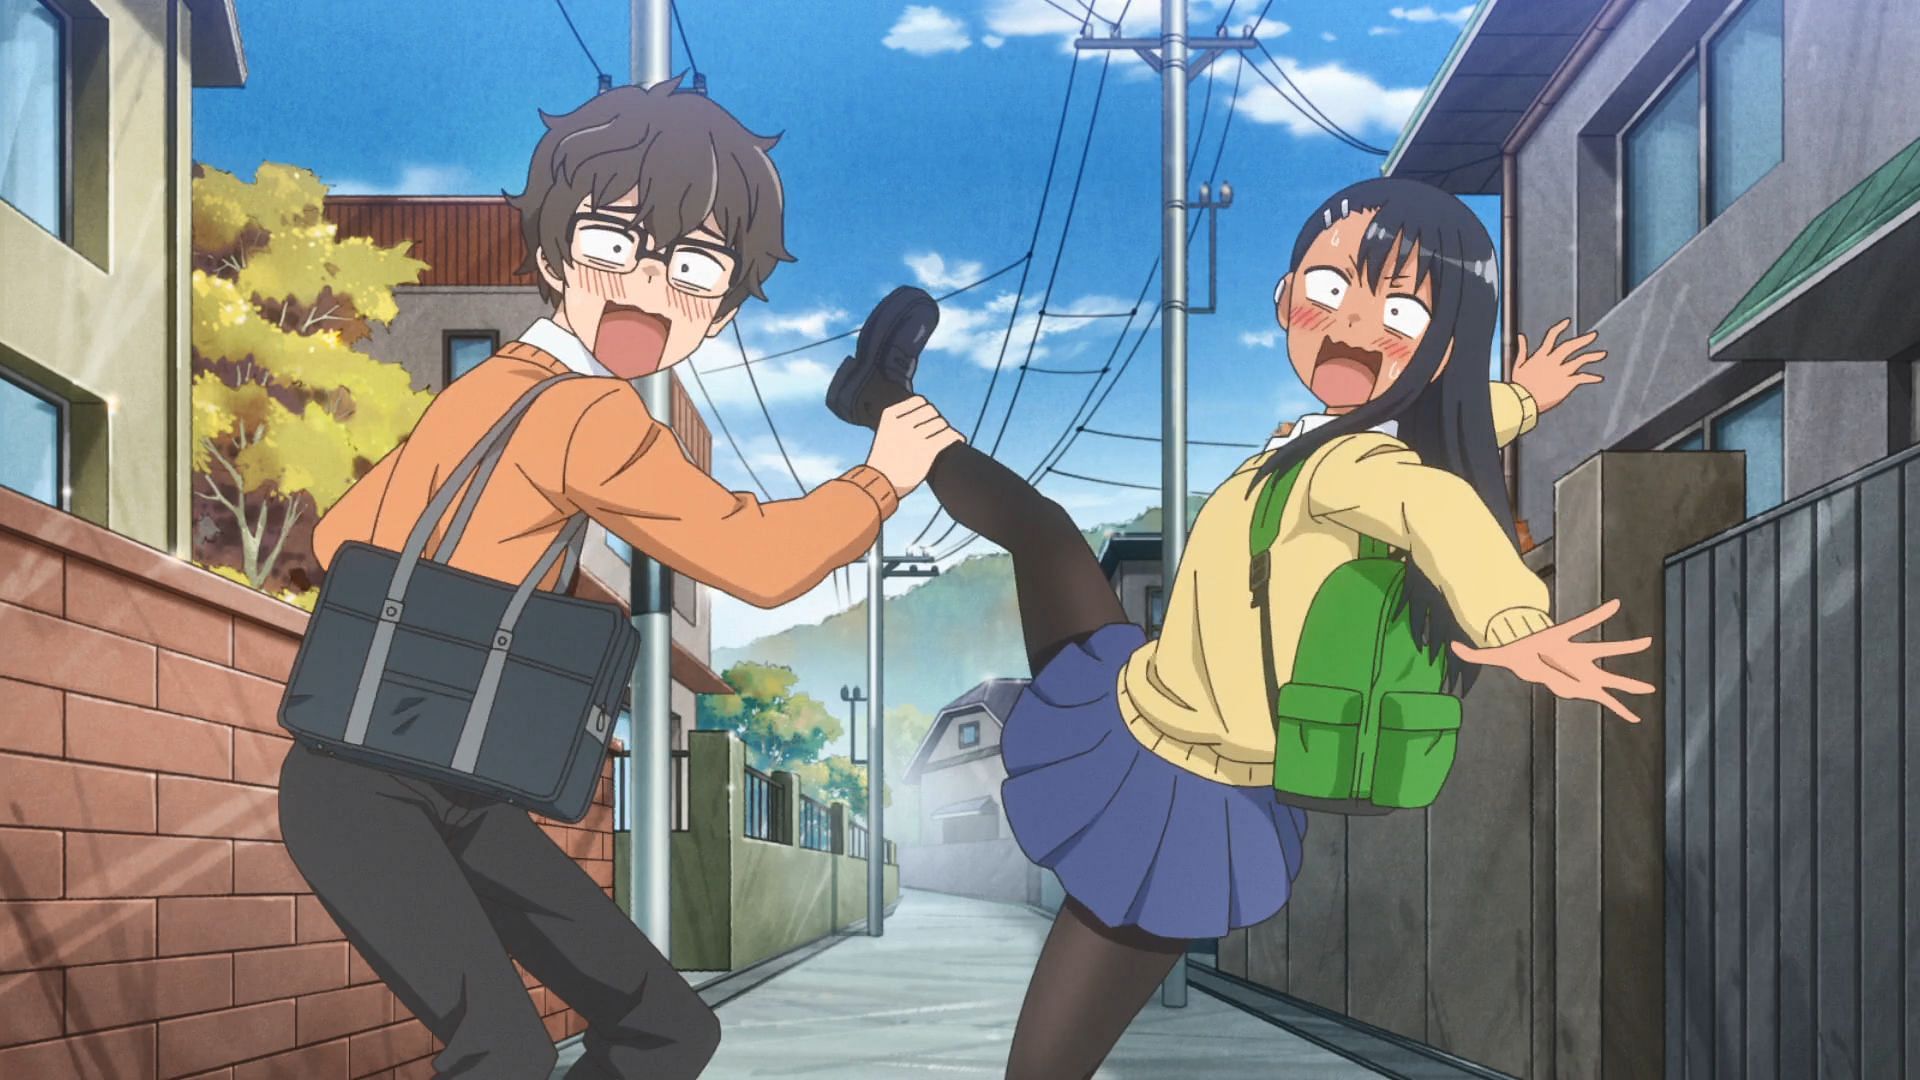 Where to Start Reading Miss Nagatoro After the Anime